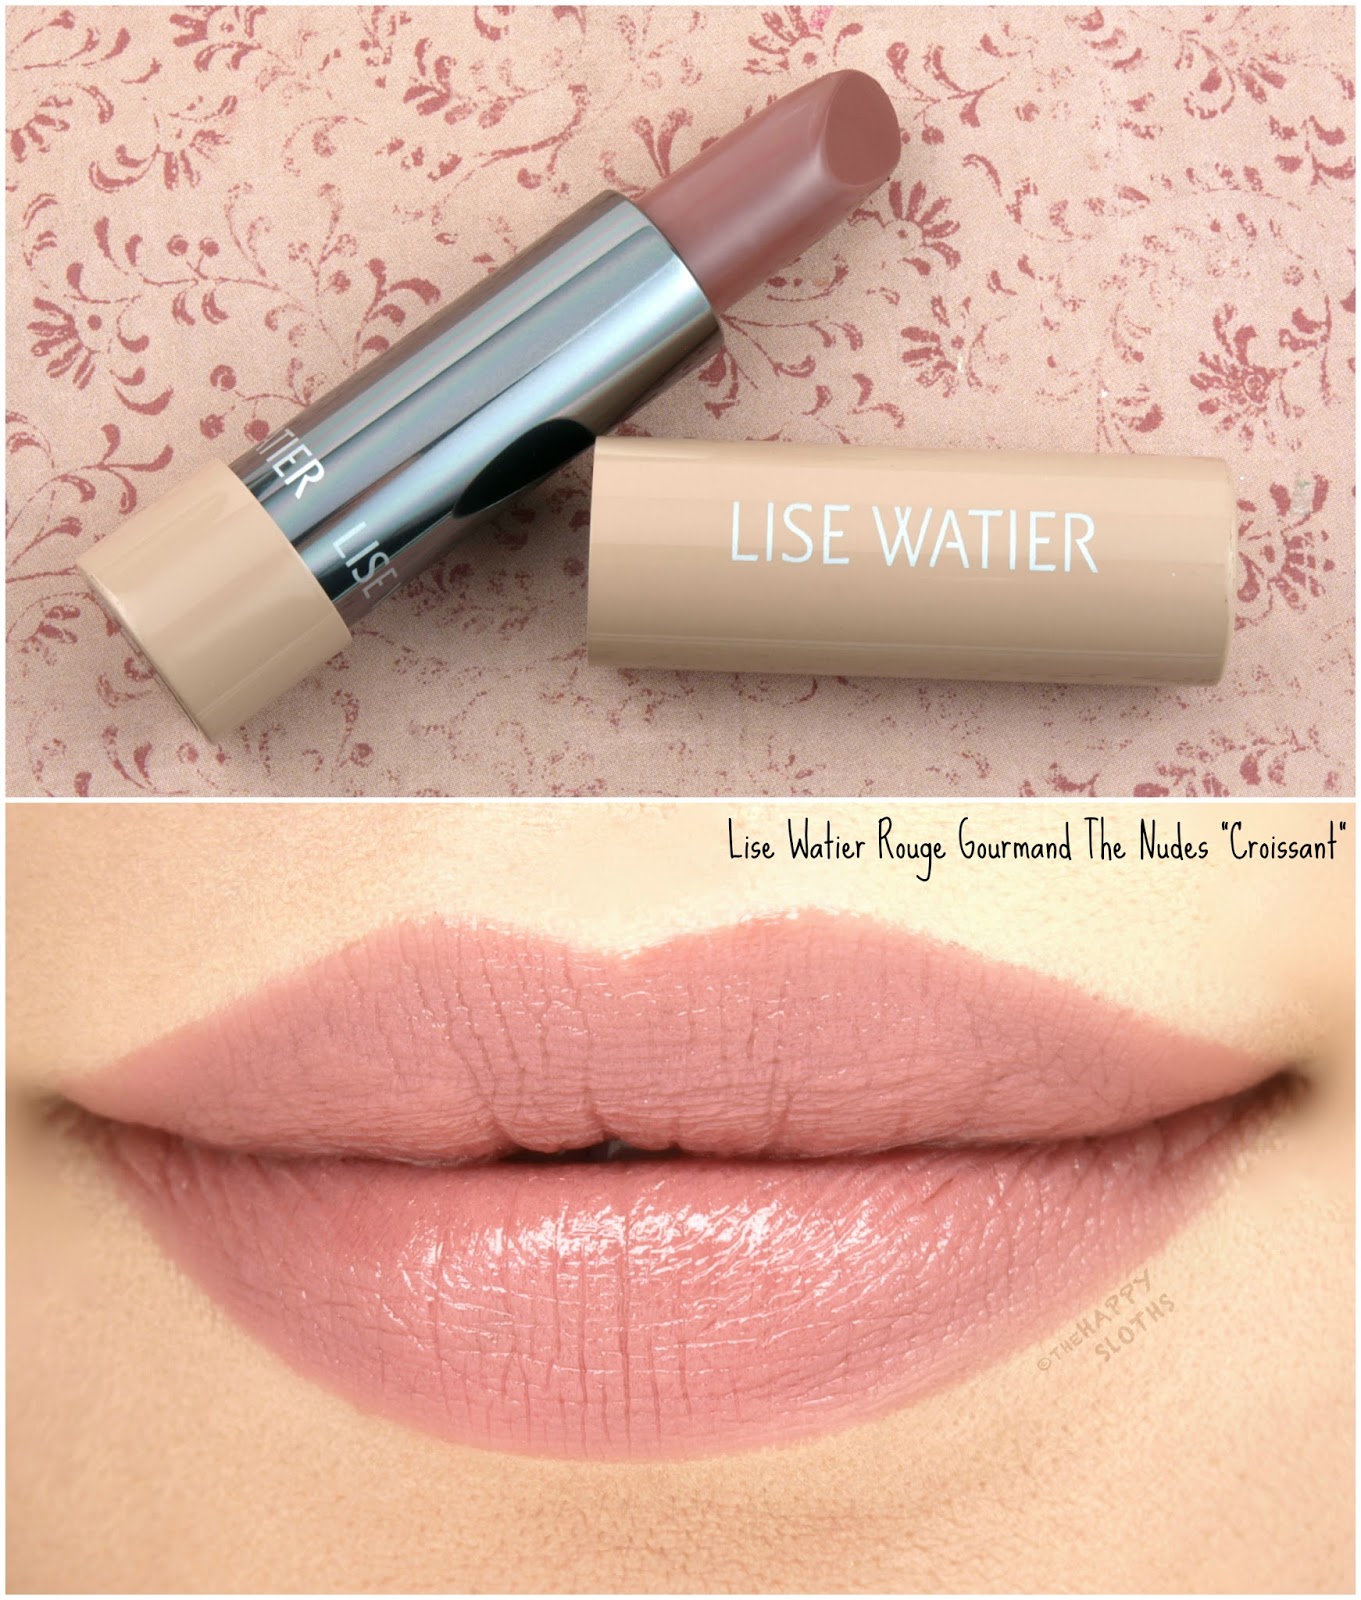 Lise Watier Rouge Gourmand The Nudes Lipstick | Croissant: Review and Swatches